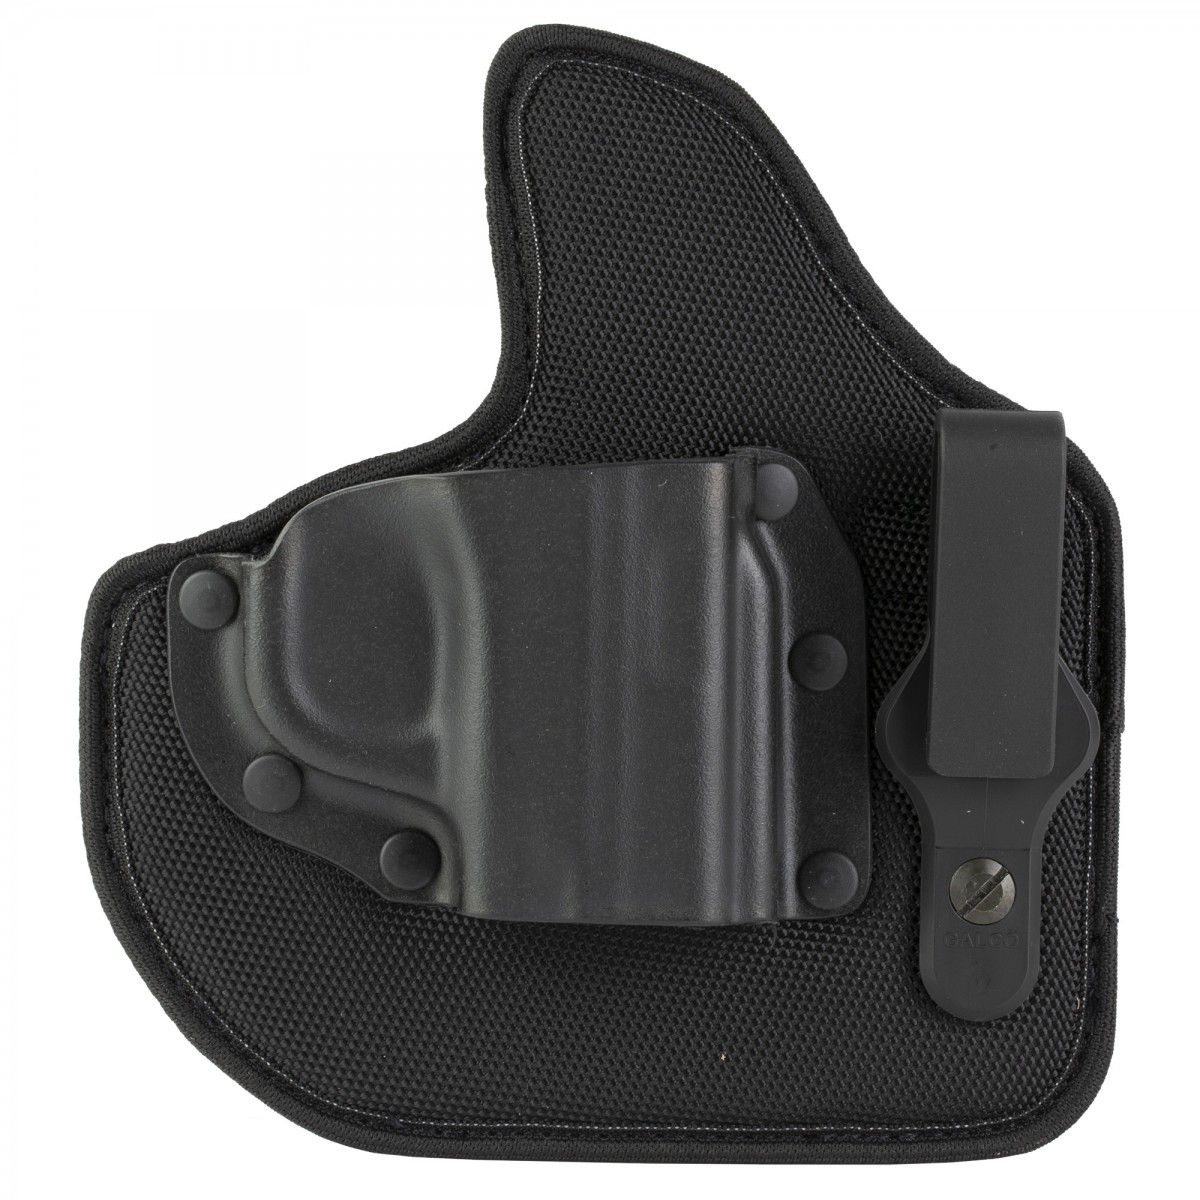 Galco Quicktuk Cloud IWB Right Hand Holster for Smith & Wesson M&P ...